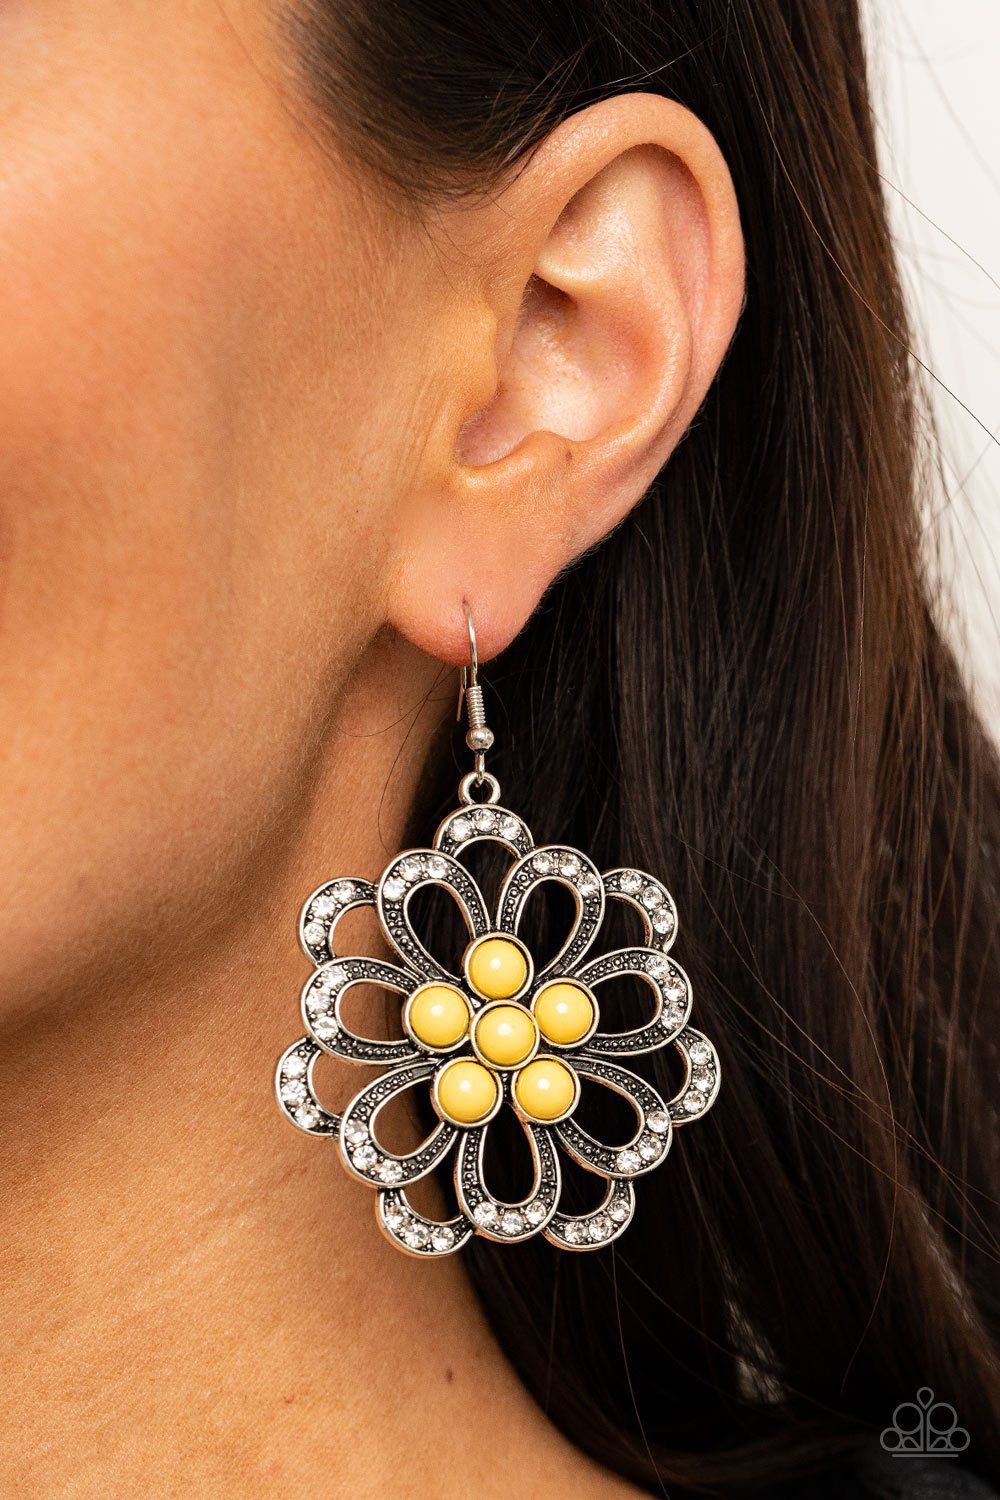 Paparazzi Accessories Dazzling Dewdrops - Yellow Earrings 